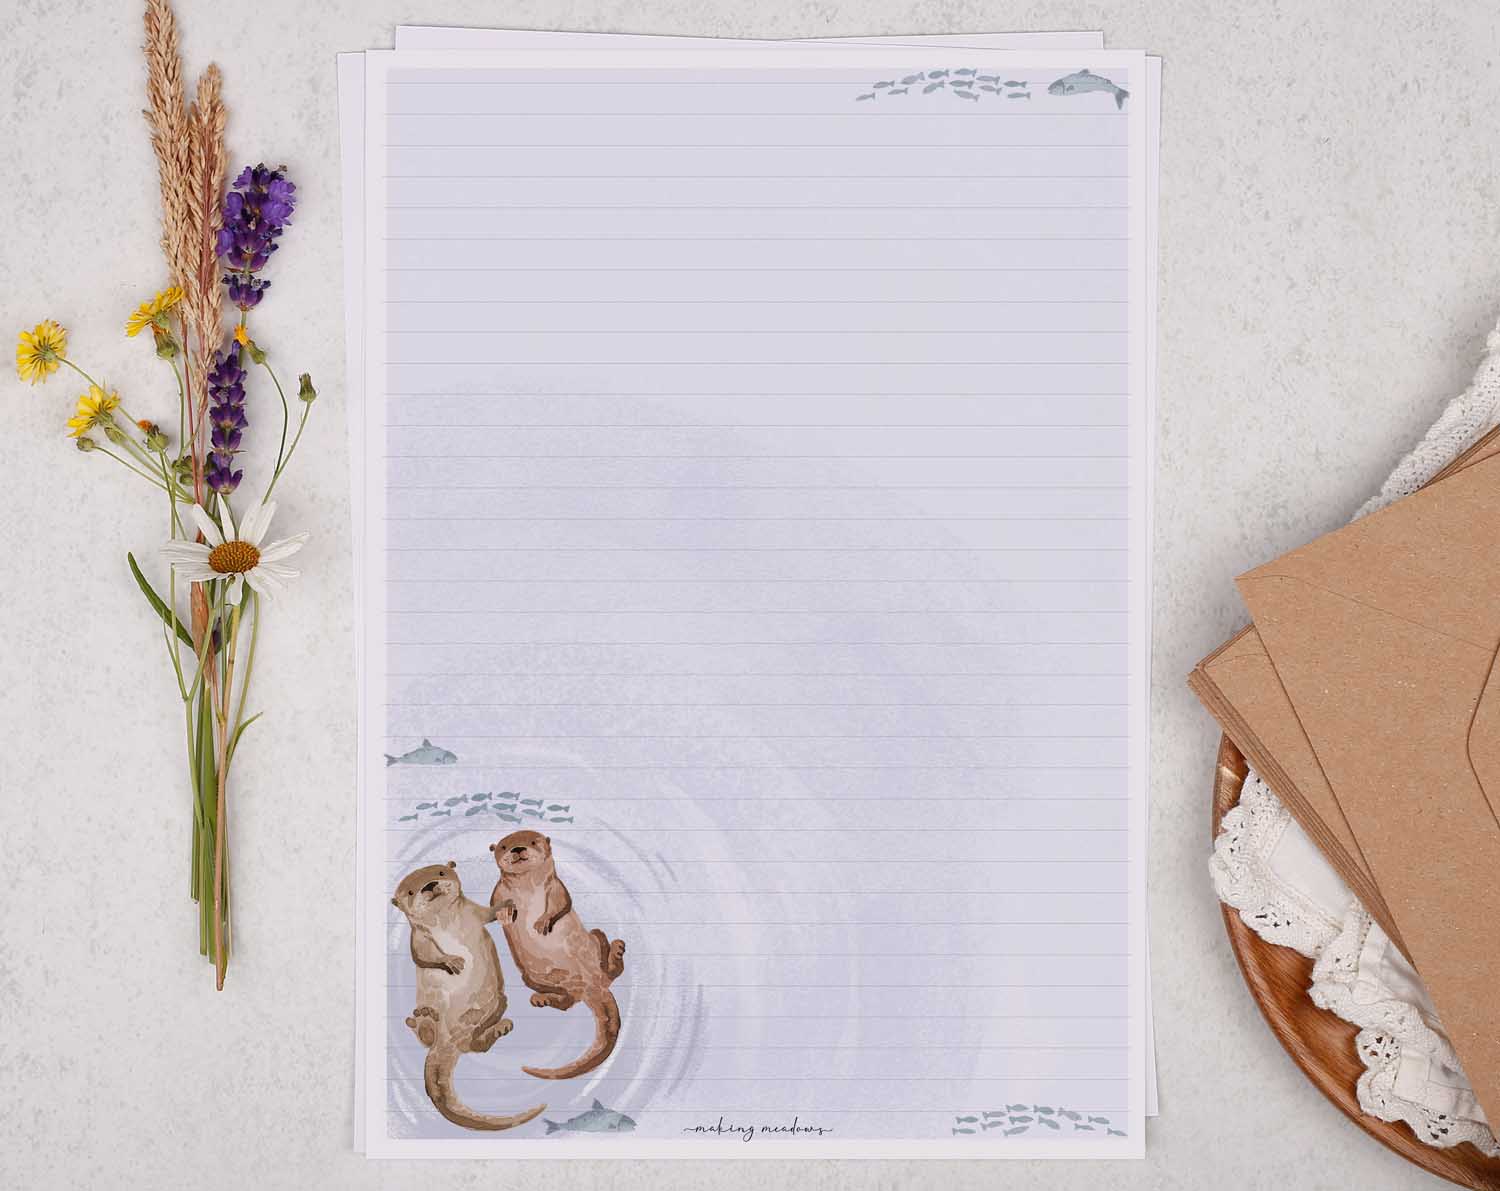 A4 letter writing paper sheets with a cute otter holding hands while floating down a river with fish. 